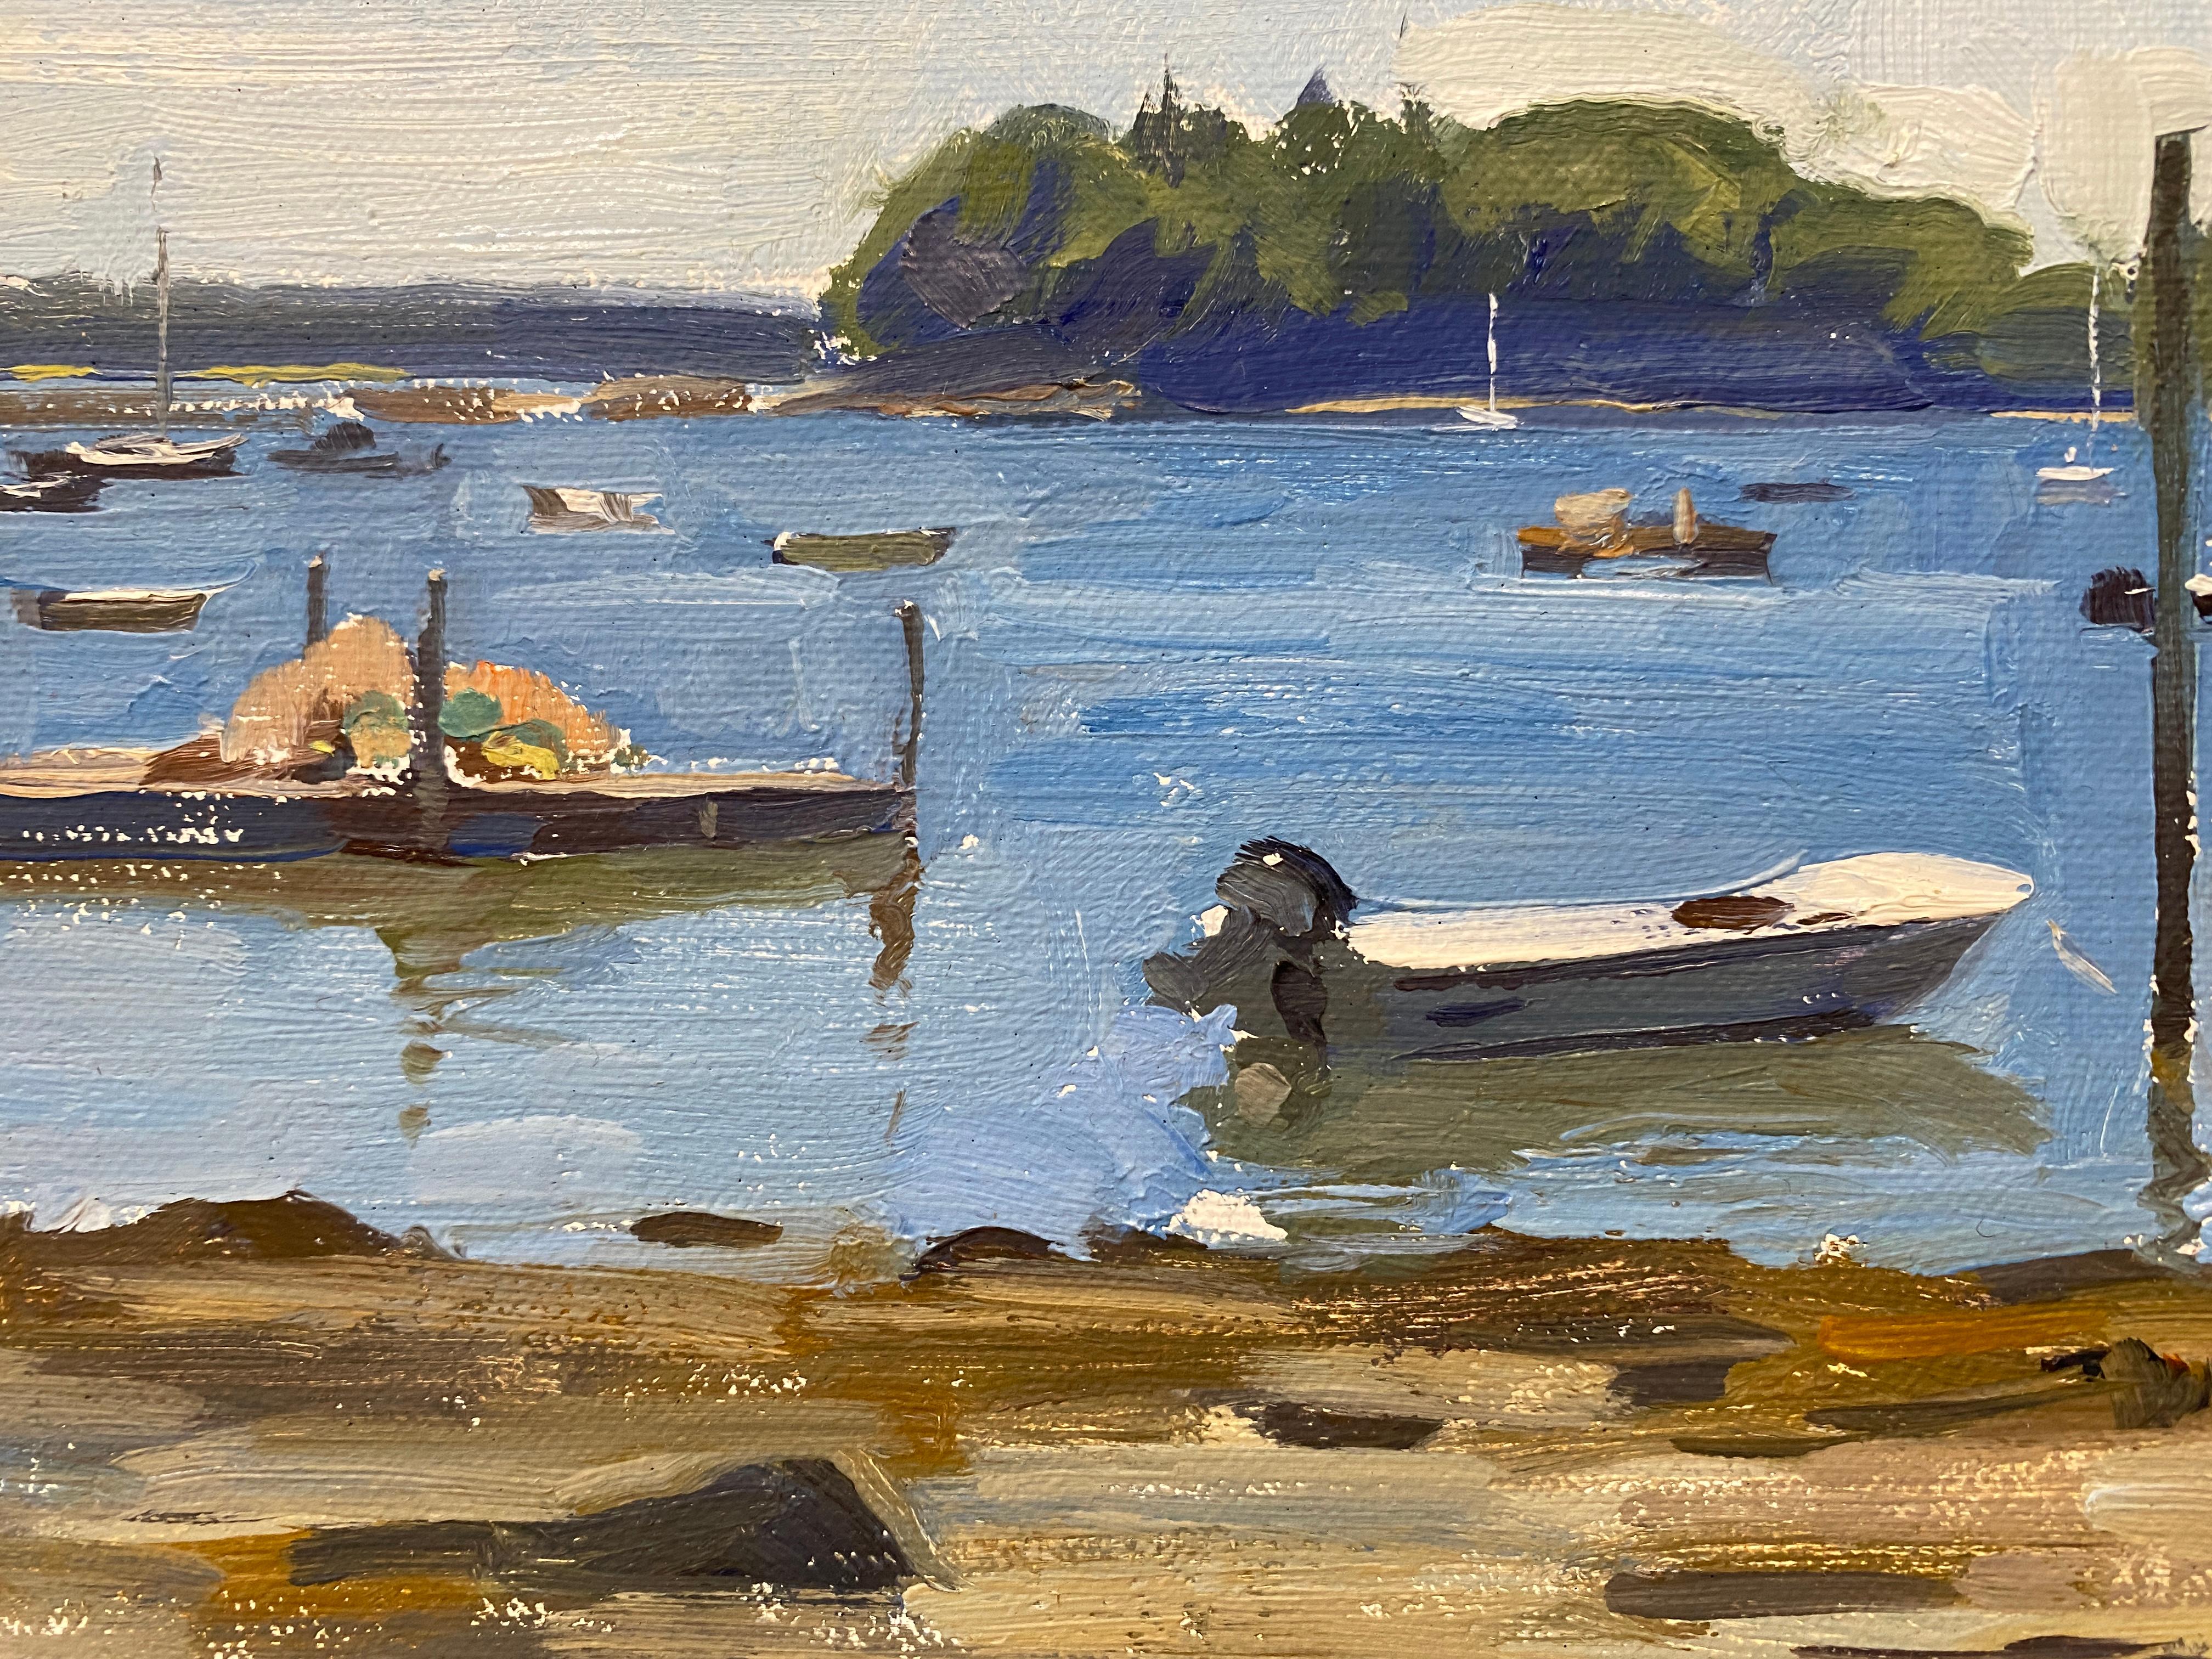 An oil painting, painted en plein air in Friendship Harbor, Maine. A classic fishing cottage rests high atop a tall wooden dock. Sandy shore foreground meets a blue body of water, speckled with boats, and rafts. The horizon meets a distant island